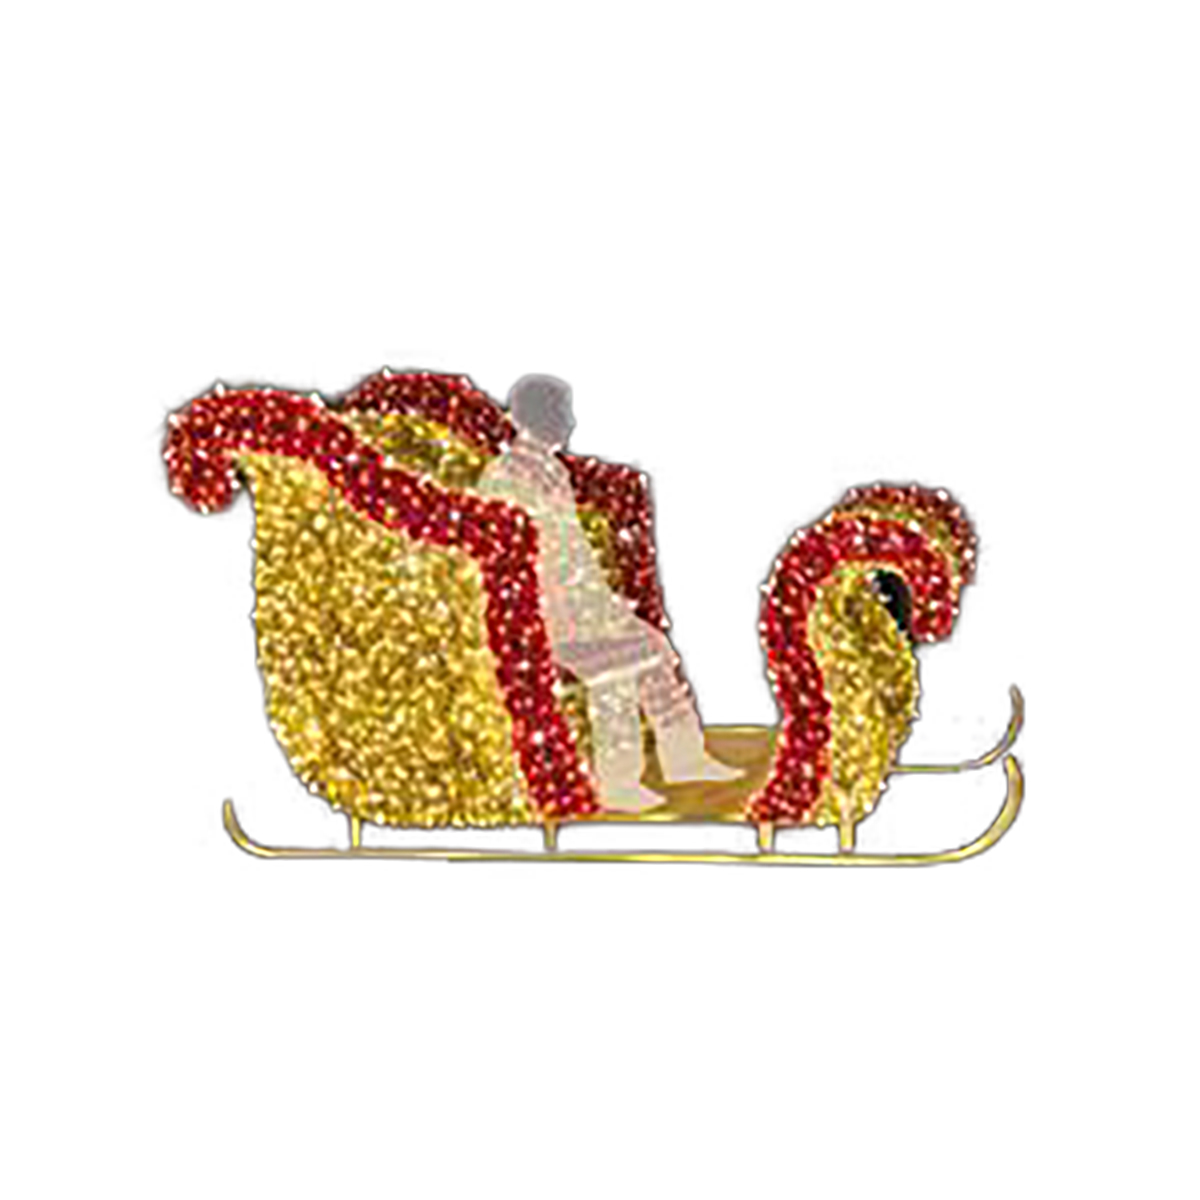 3D Sleigh - Large Commercial Christmas Display - Life-size - LED Lights - 10ft long - 5ft tall